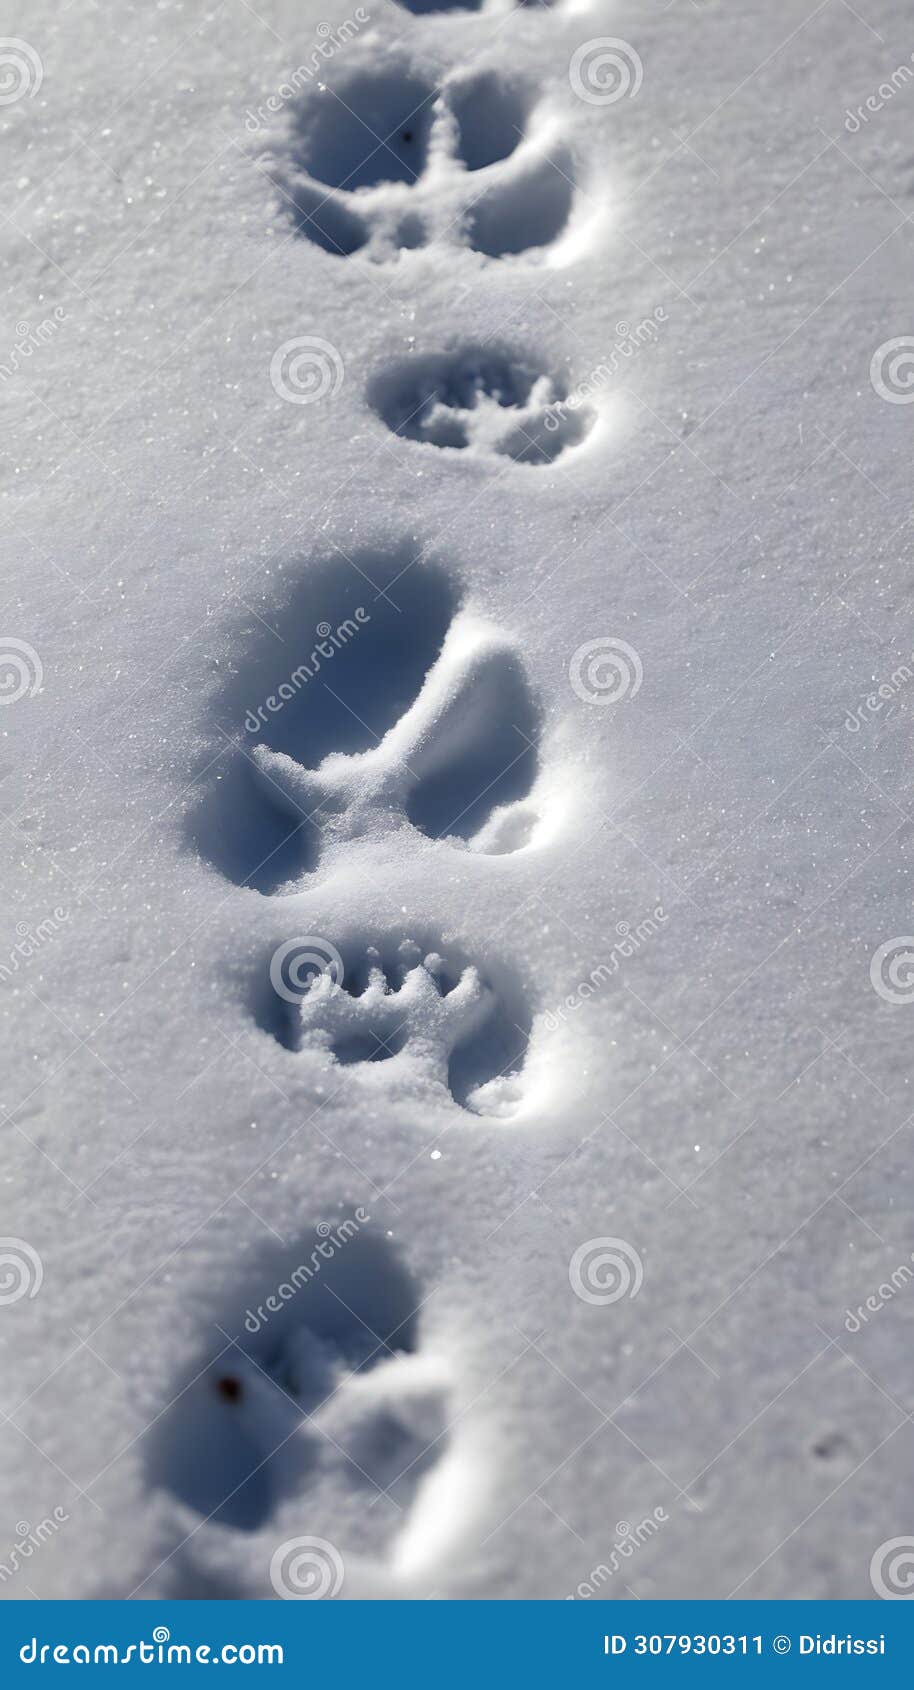 tracking animals in the snow, identifying snow prints, recognizing animals based on their footprints